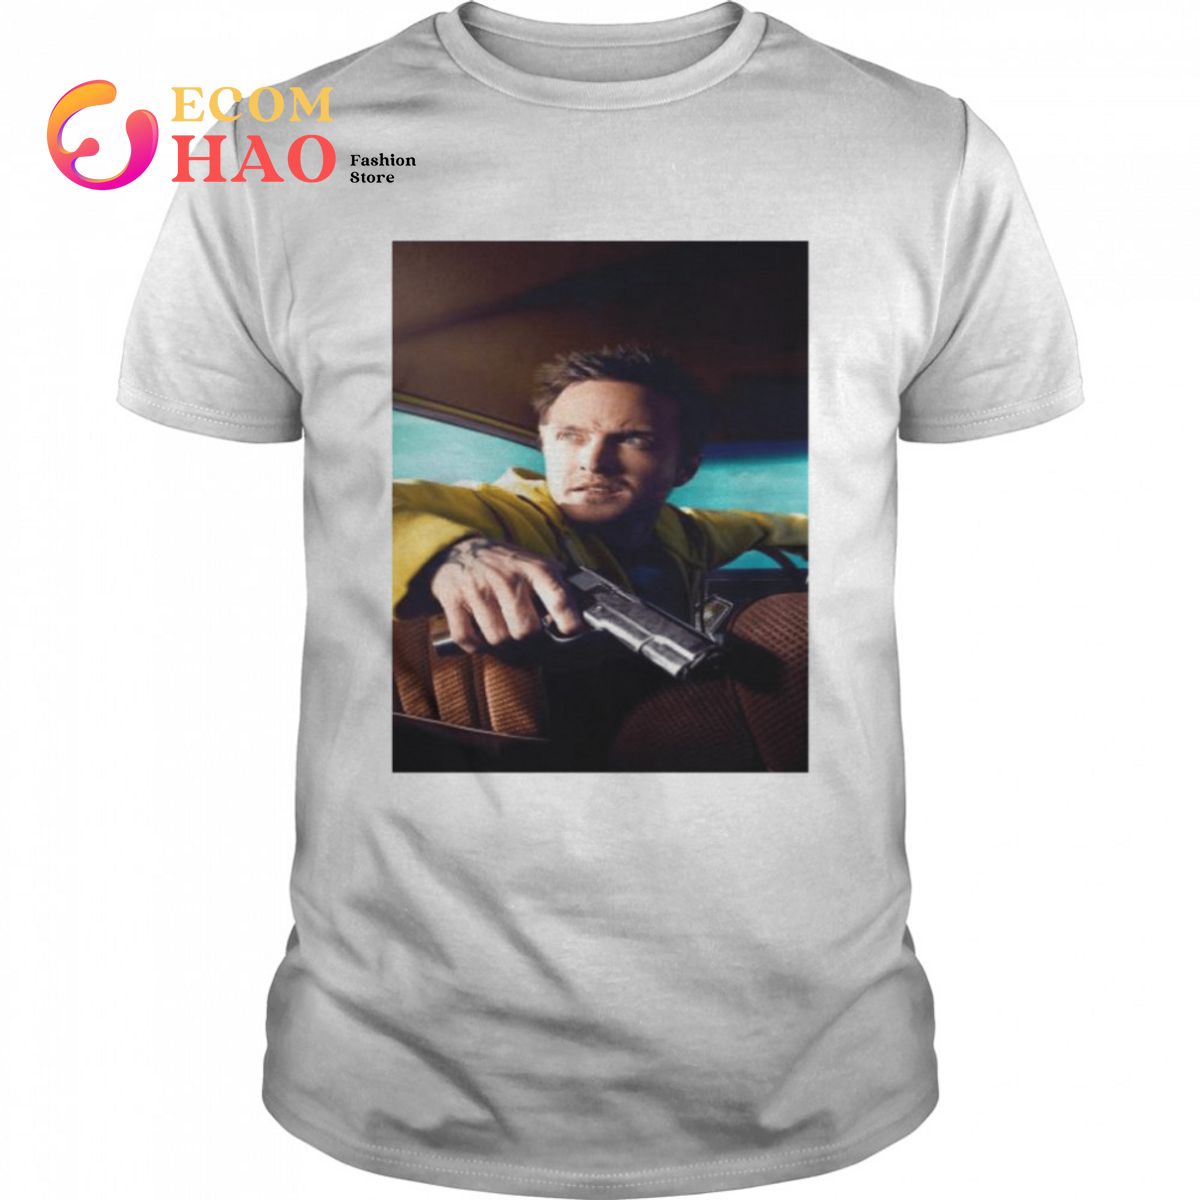 Nikke Palads Shredded Aaron paul is jesse pinkman in better call saul of breaking bad universe  wall shirt - Ecomhao Store